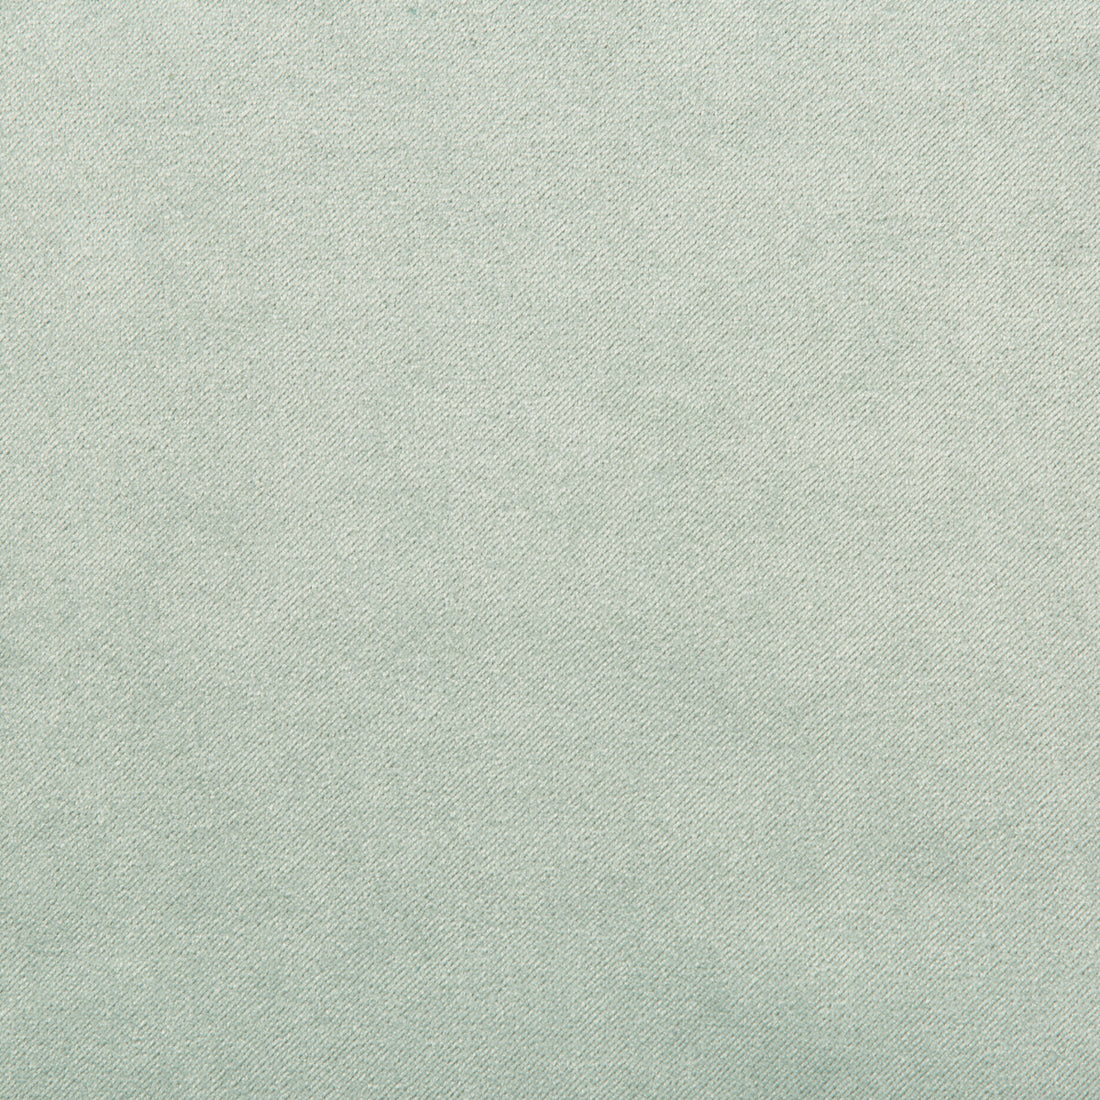 Madison Velvet fabric in seafoam color - pattern 35402.23.0 - by Kravet Contract